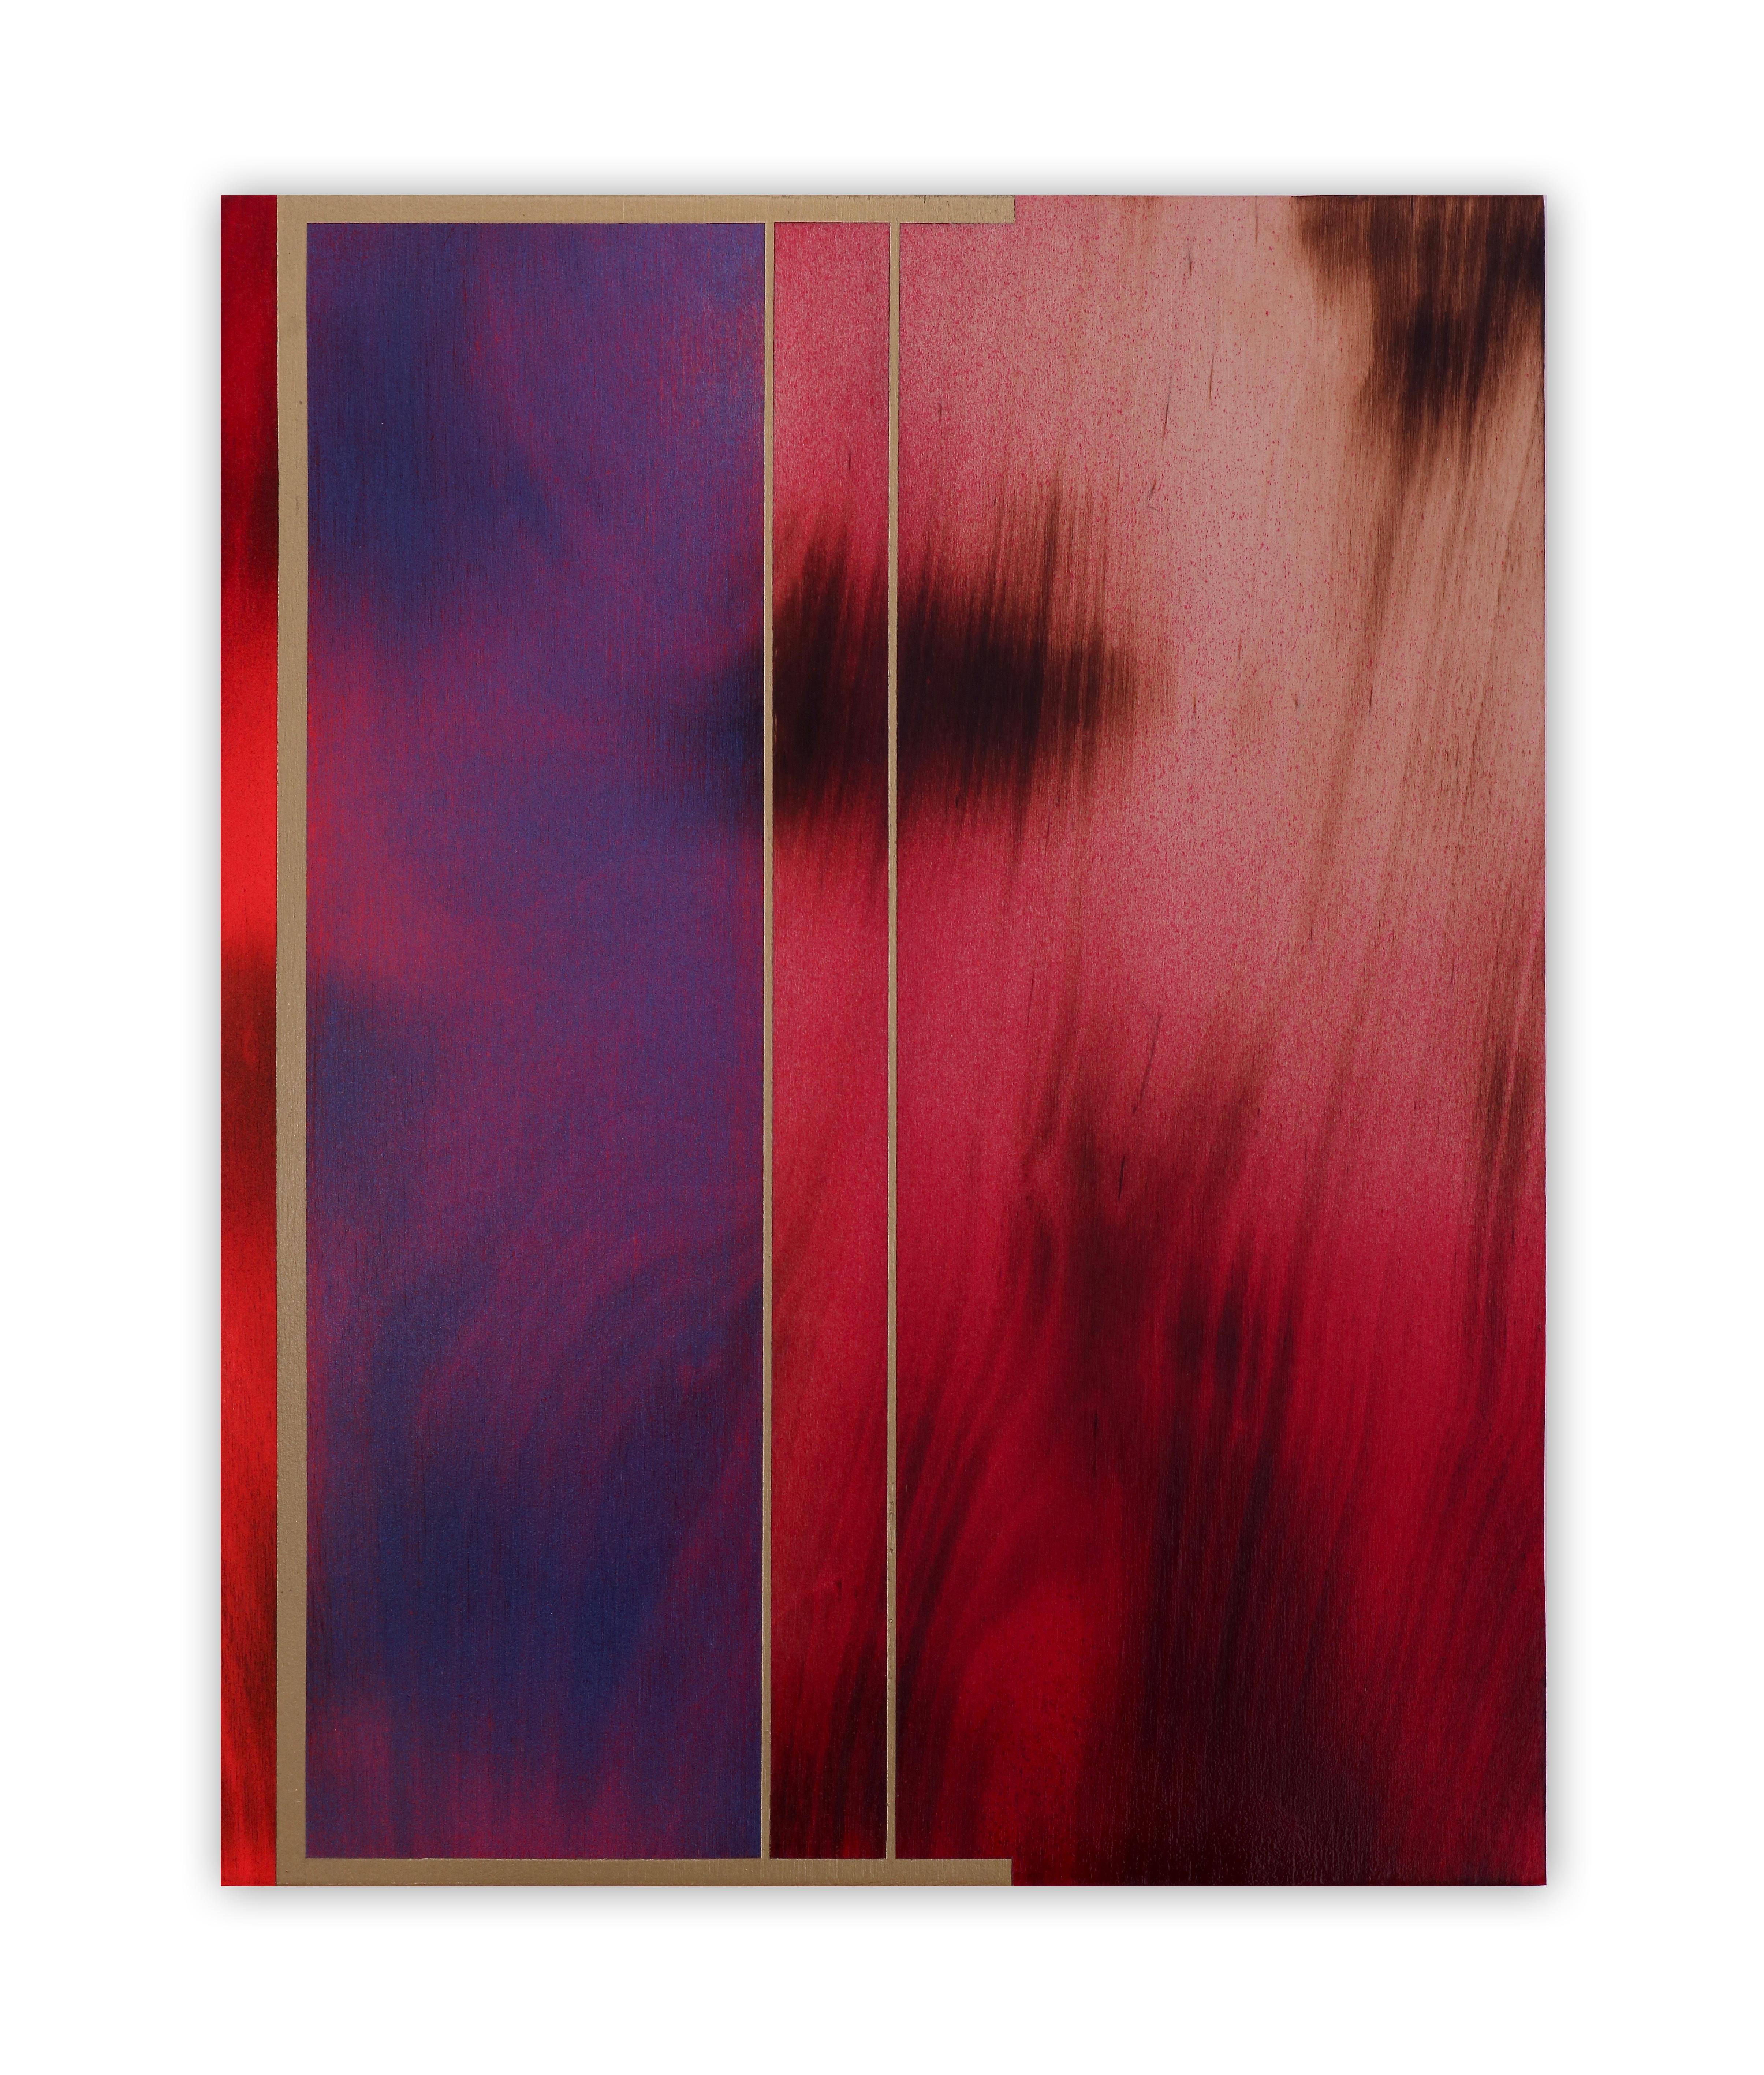 Frost and Decimals (small scale grid fushia painting abstract wood contemporary